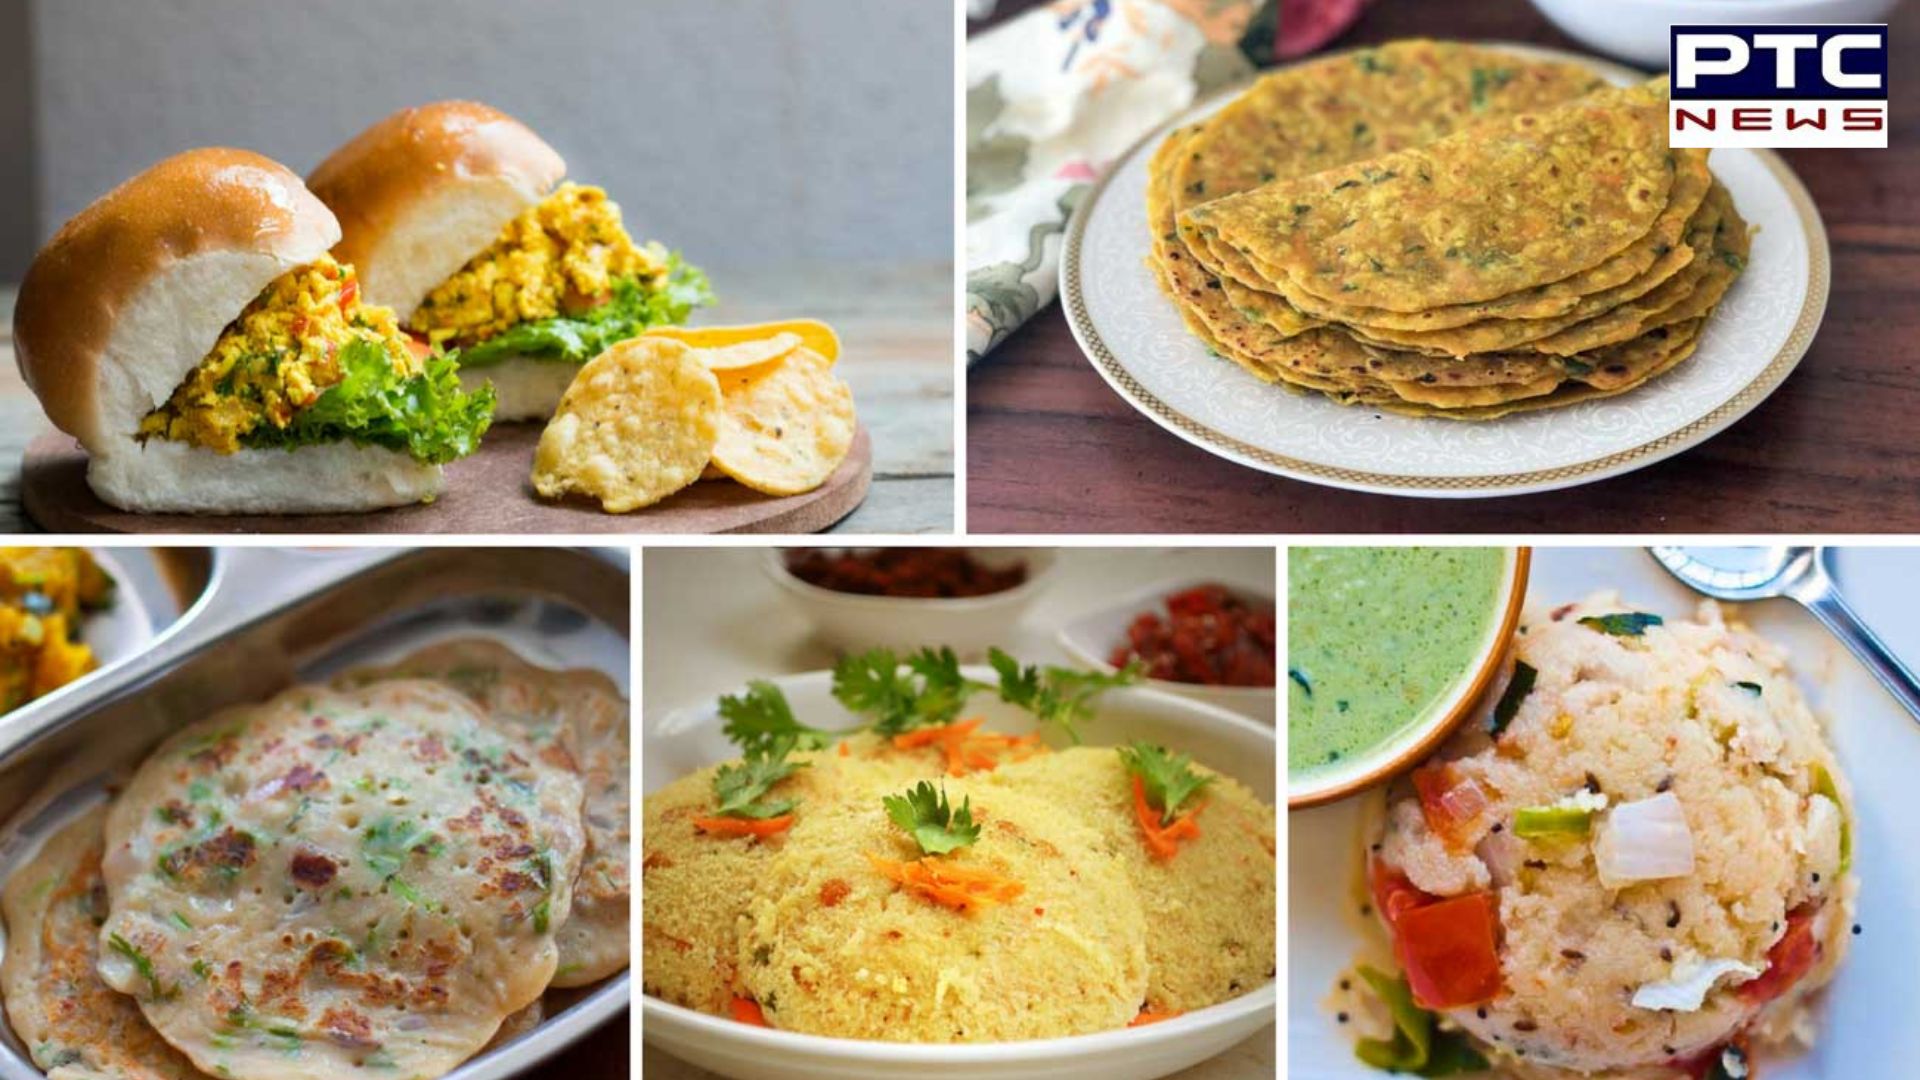 Weekend Breakfast Ideas: List of mouth-watering, tempting dishes to relish this weekend